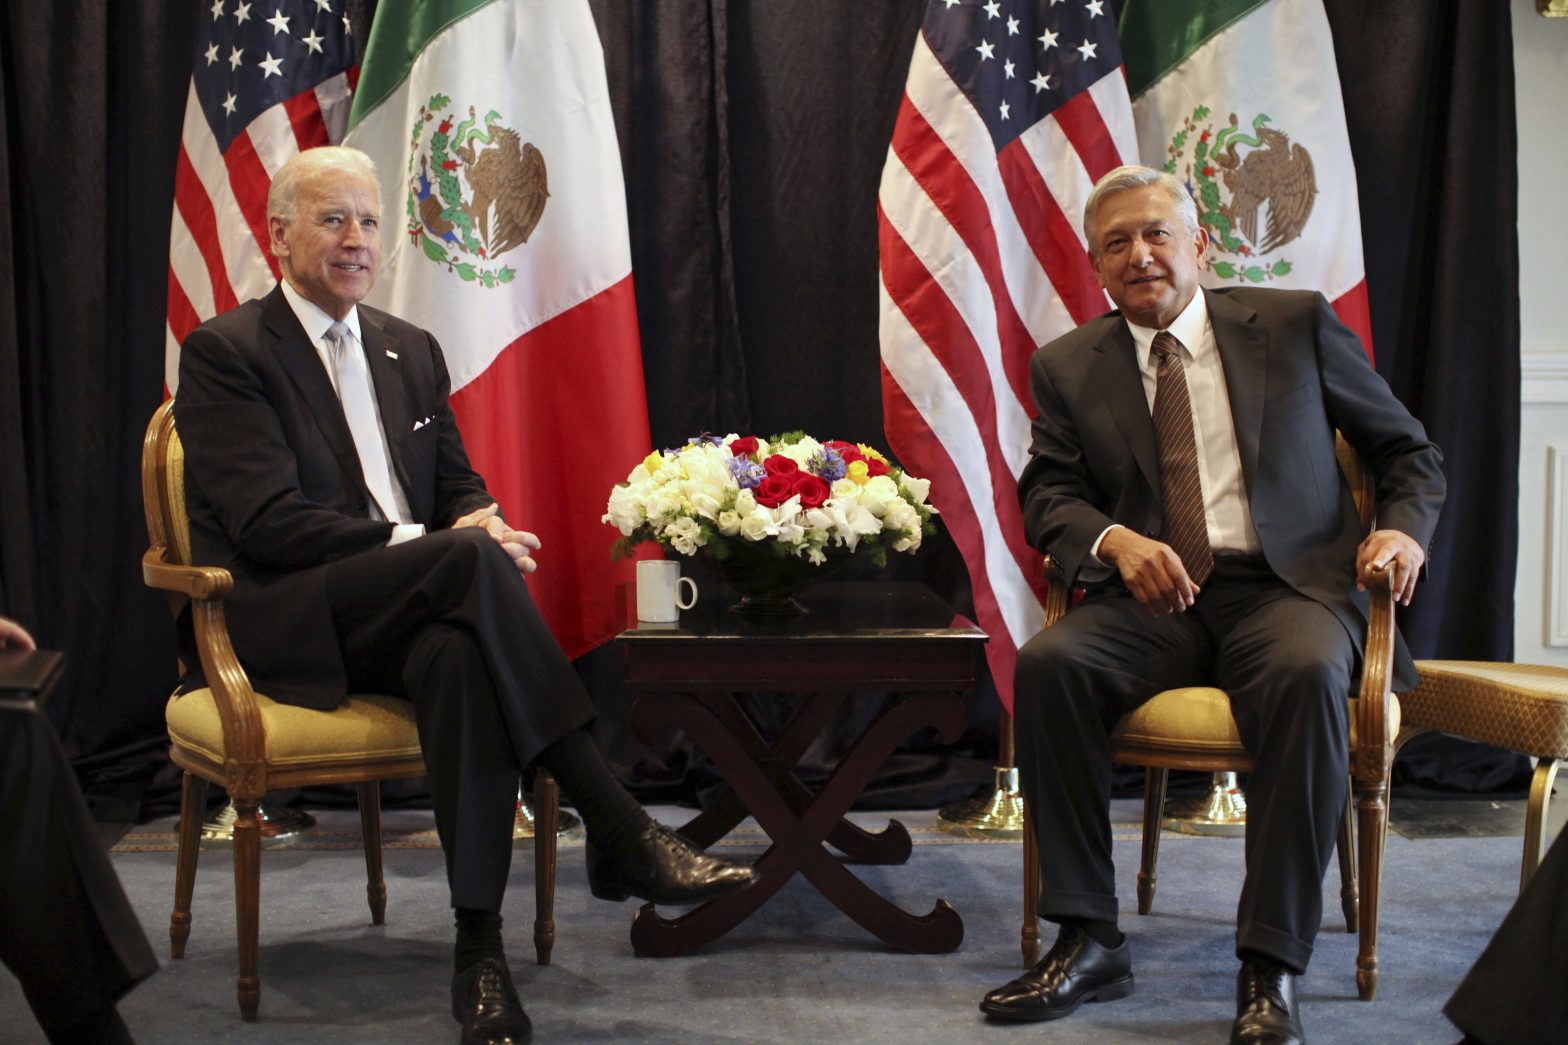 Biden to Meet With Mexican President Amid Migration Issues